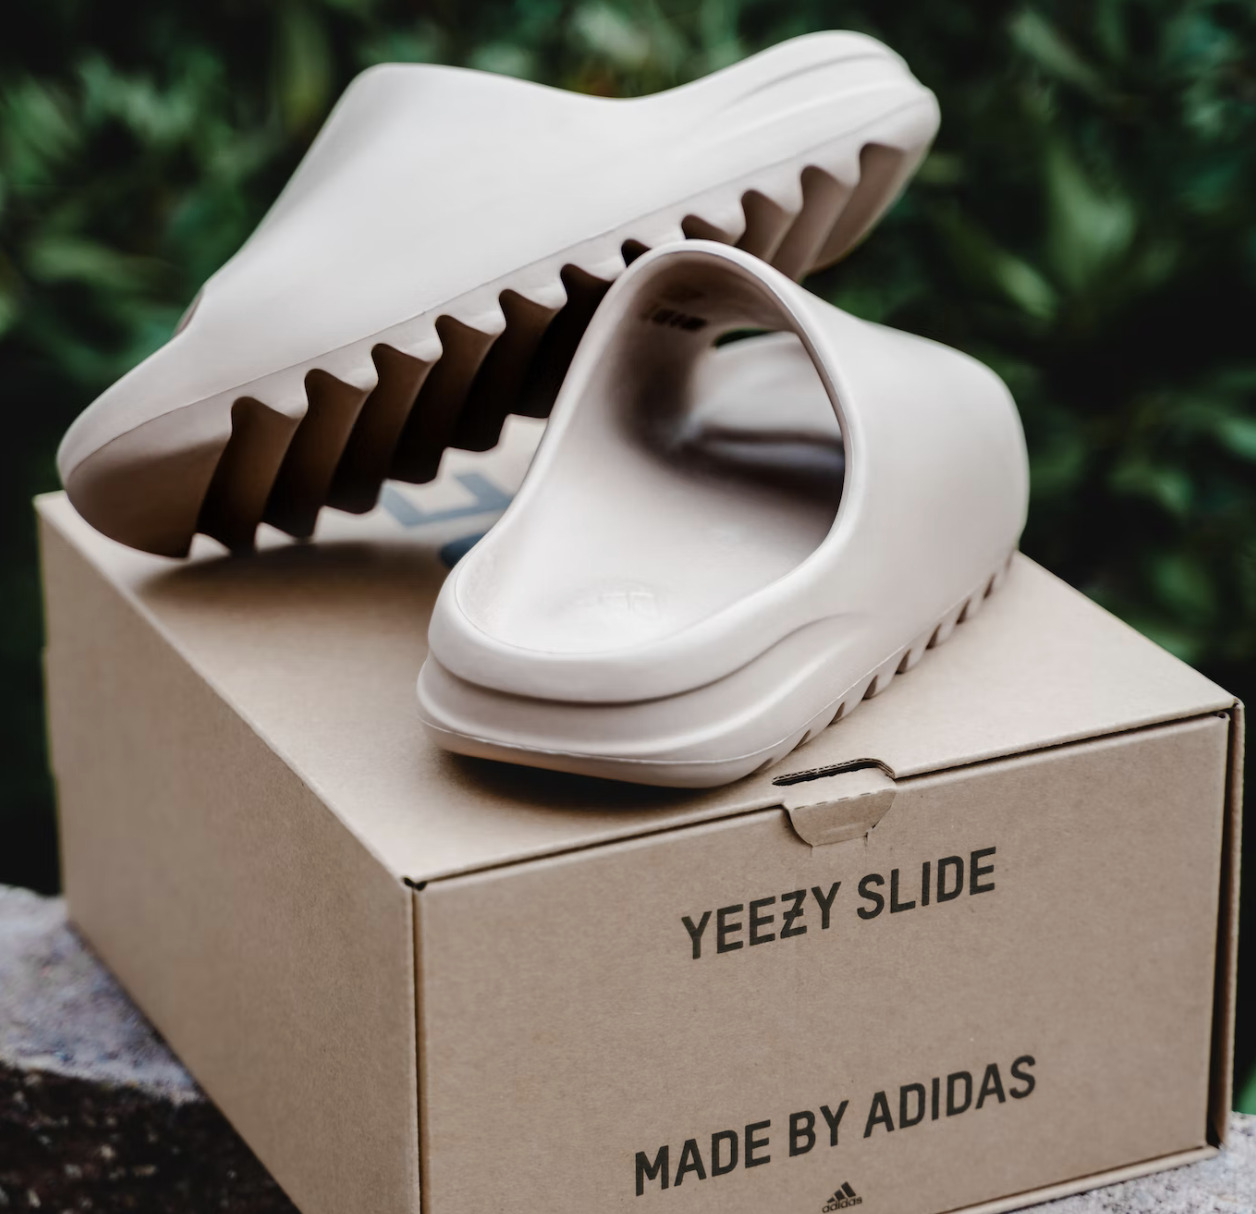 Do Yeezy Slides Run Big or Small